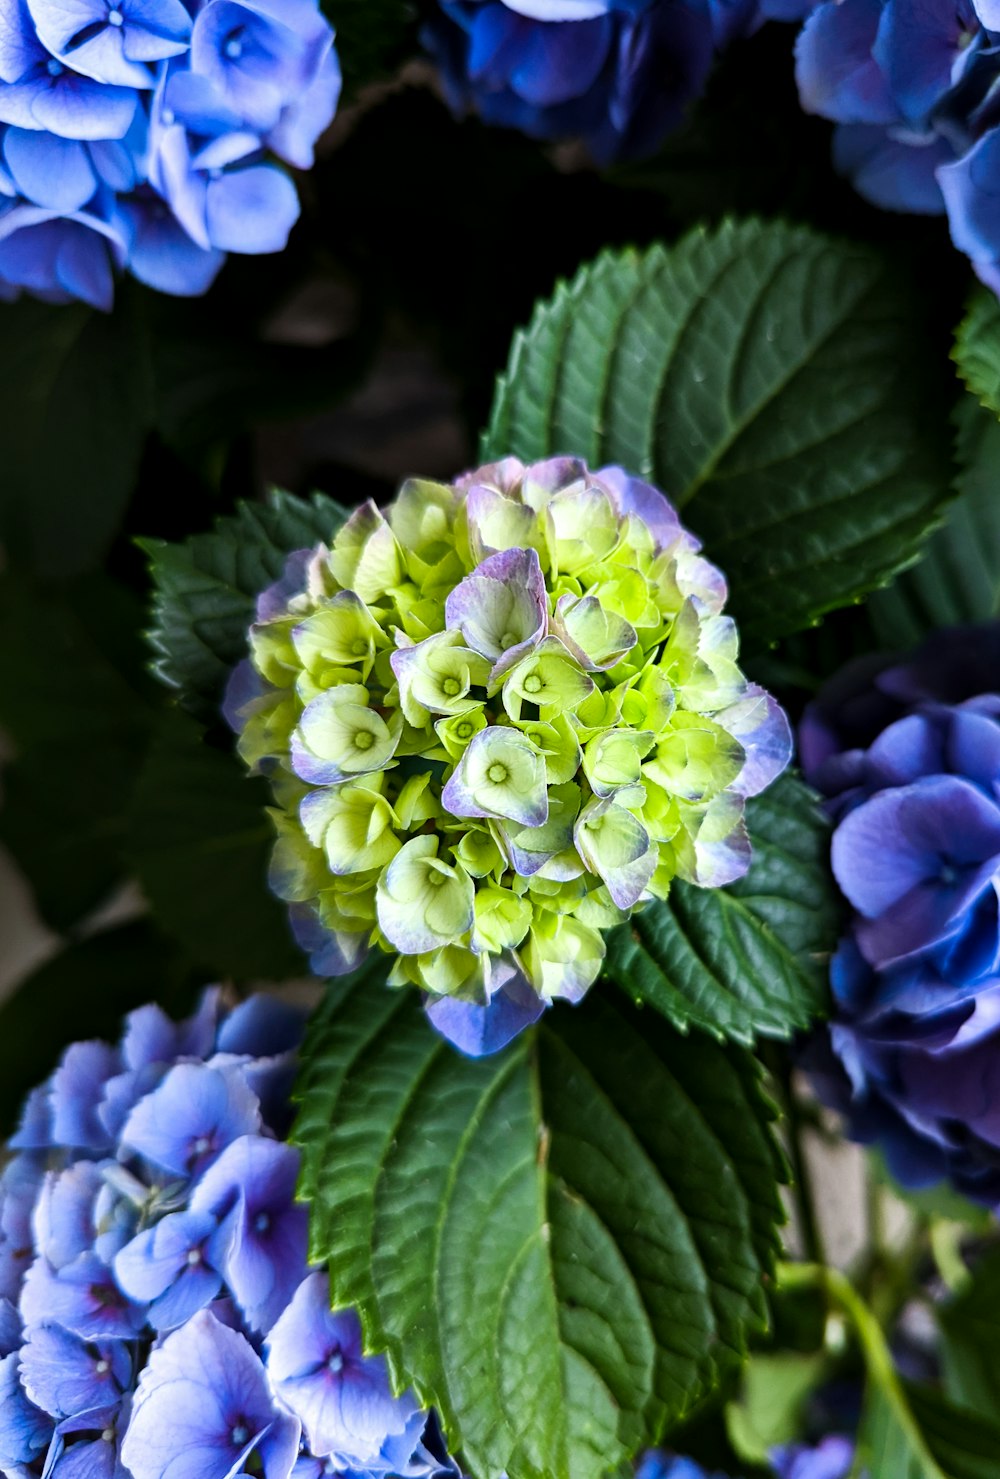 a close up of a bunch of blue and green flowers